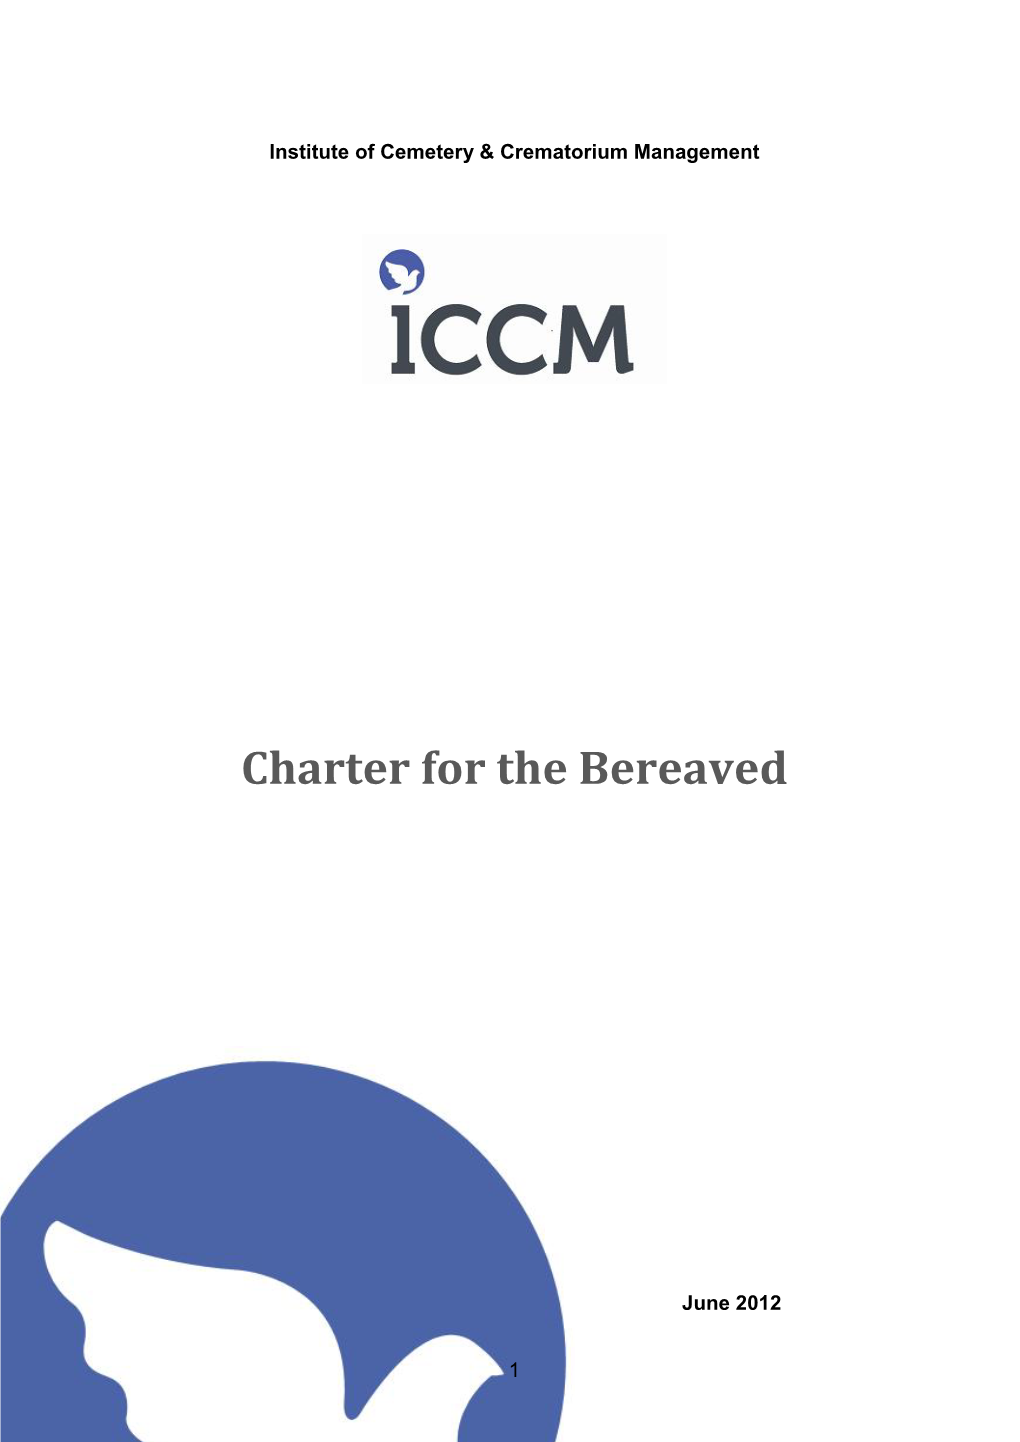 Charter for the Bereaved